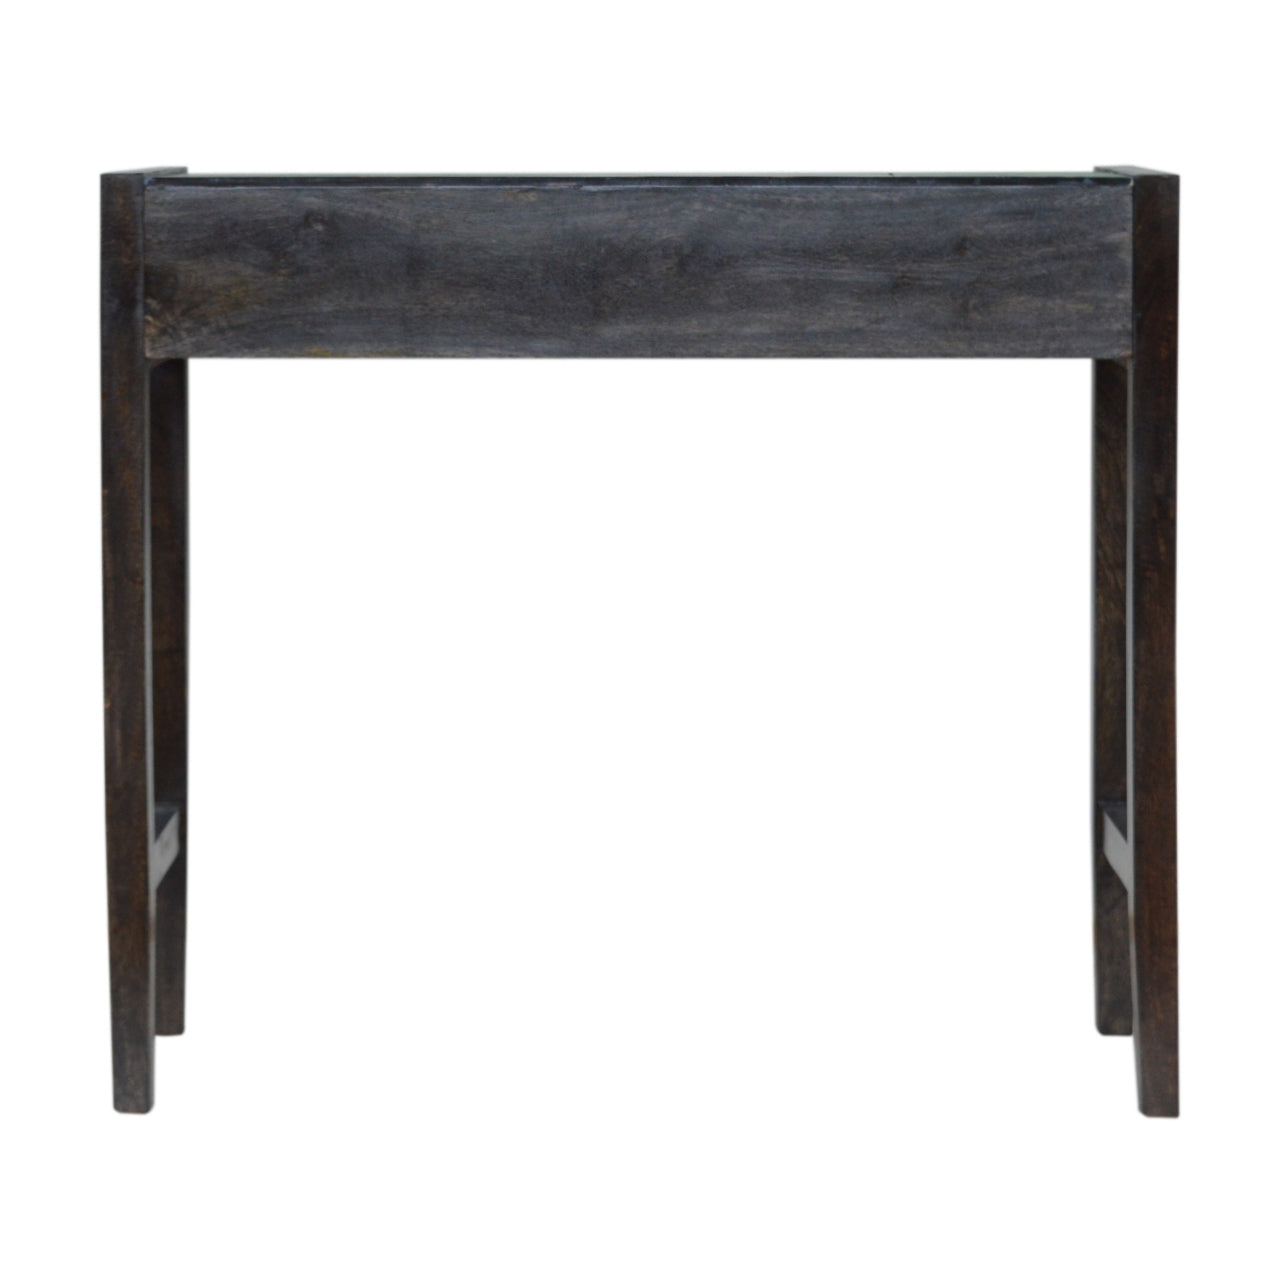 Avanti Mayfair Lady Console Table - mancavesuperstore